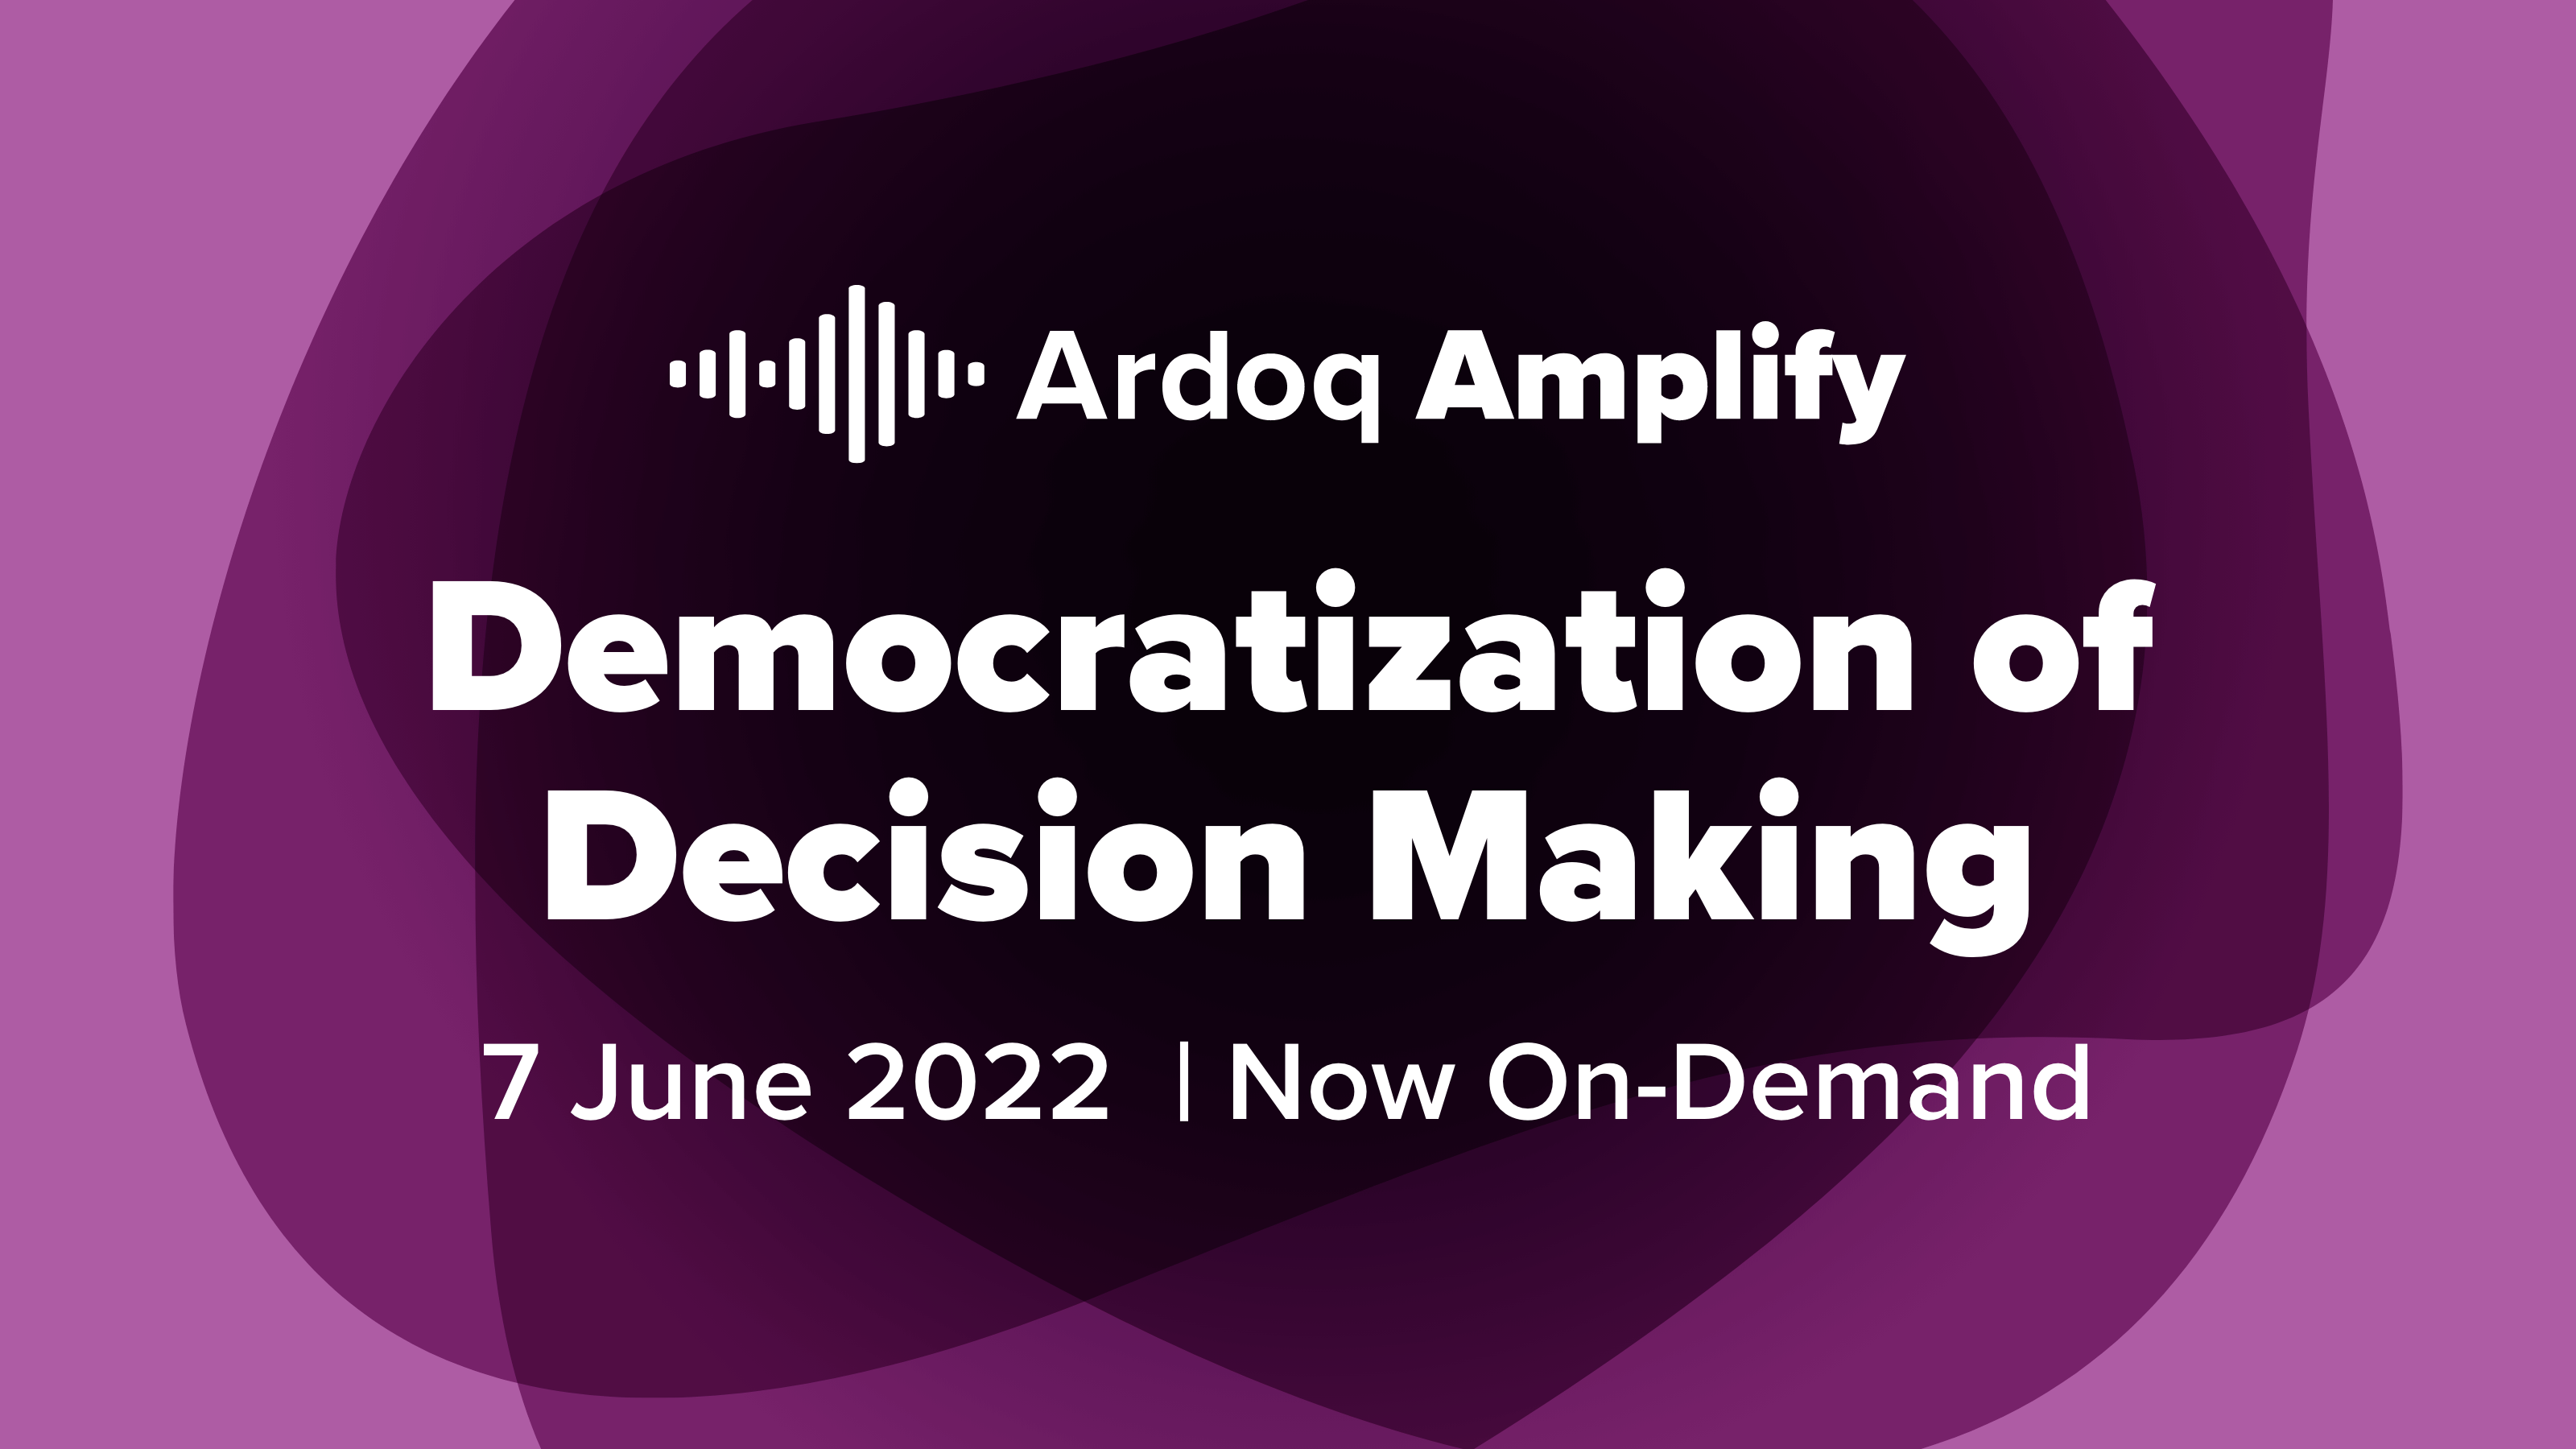 Highlights and Insights from Ardoq Amplify 2022